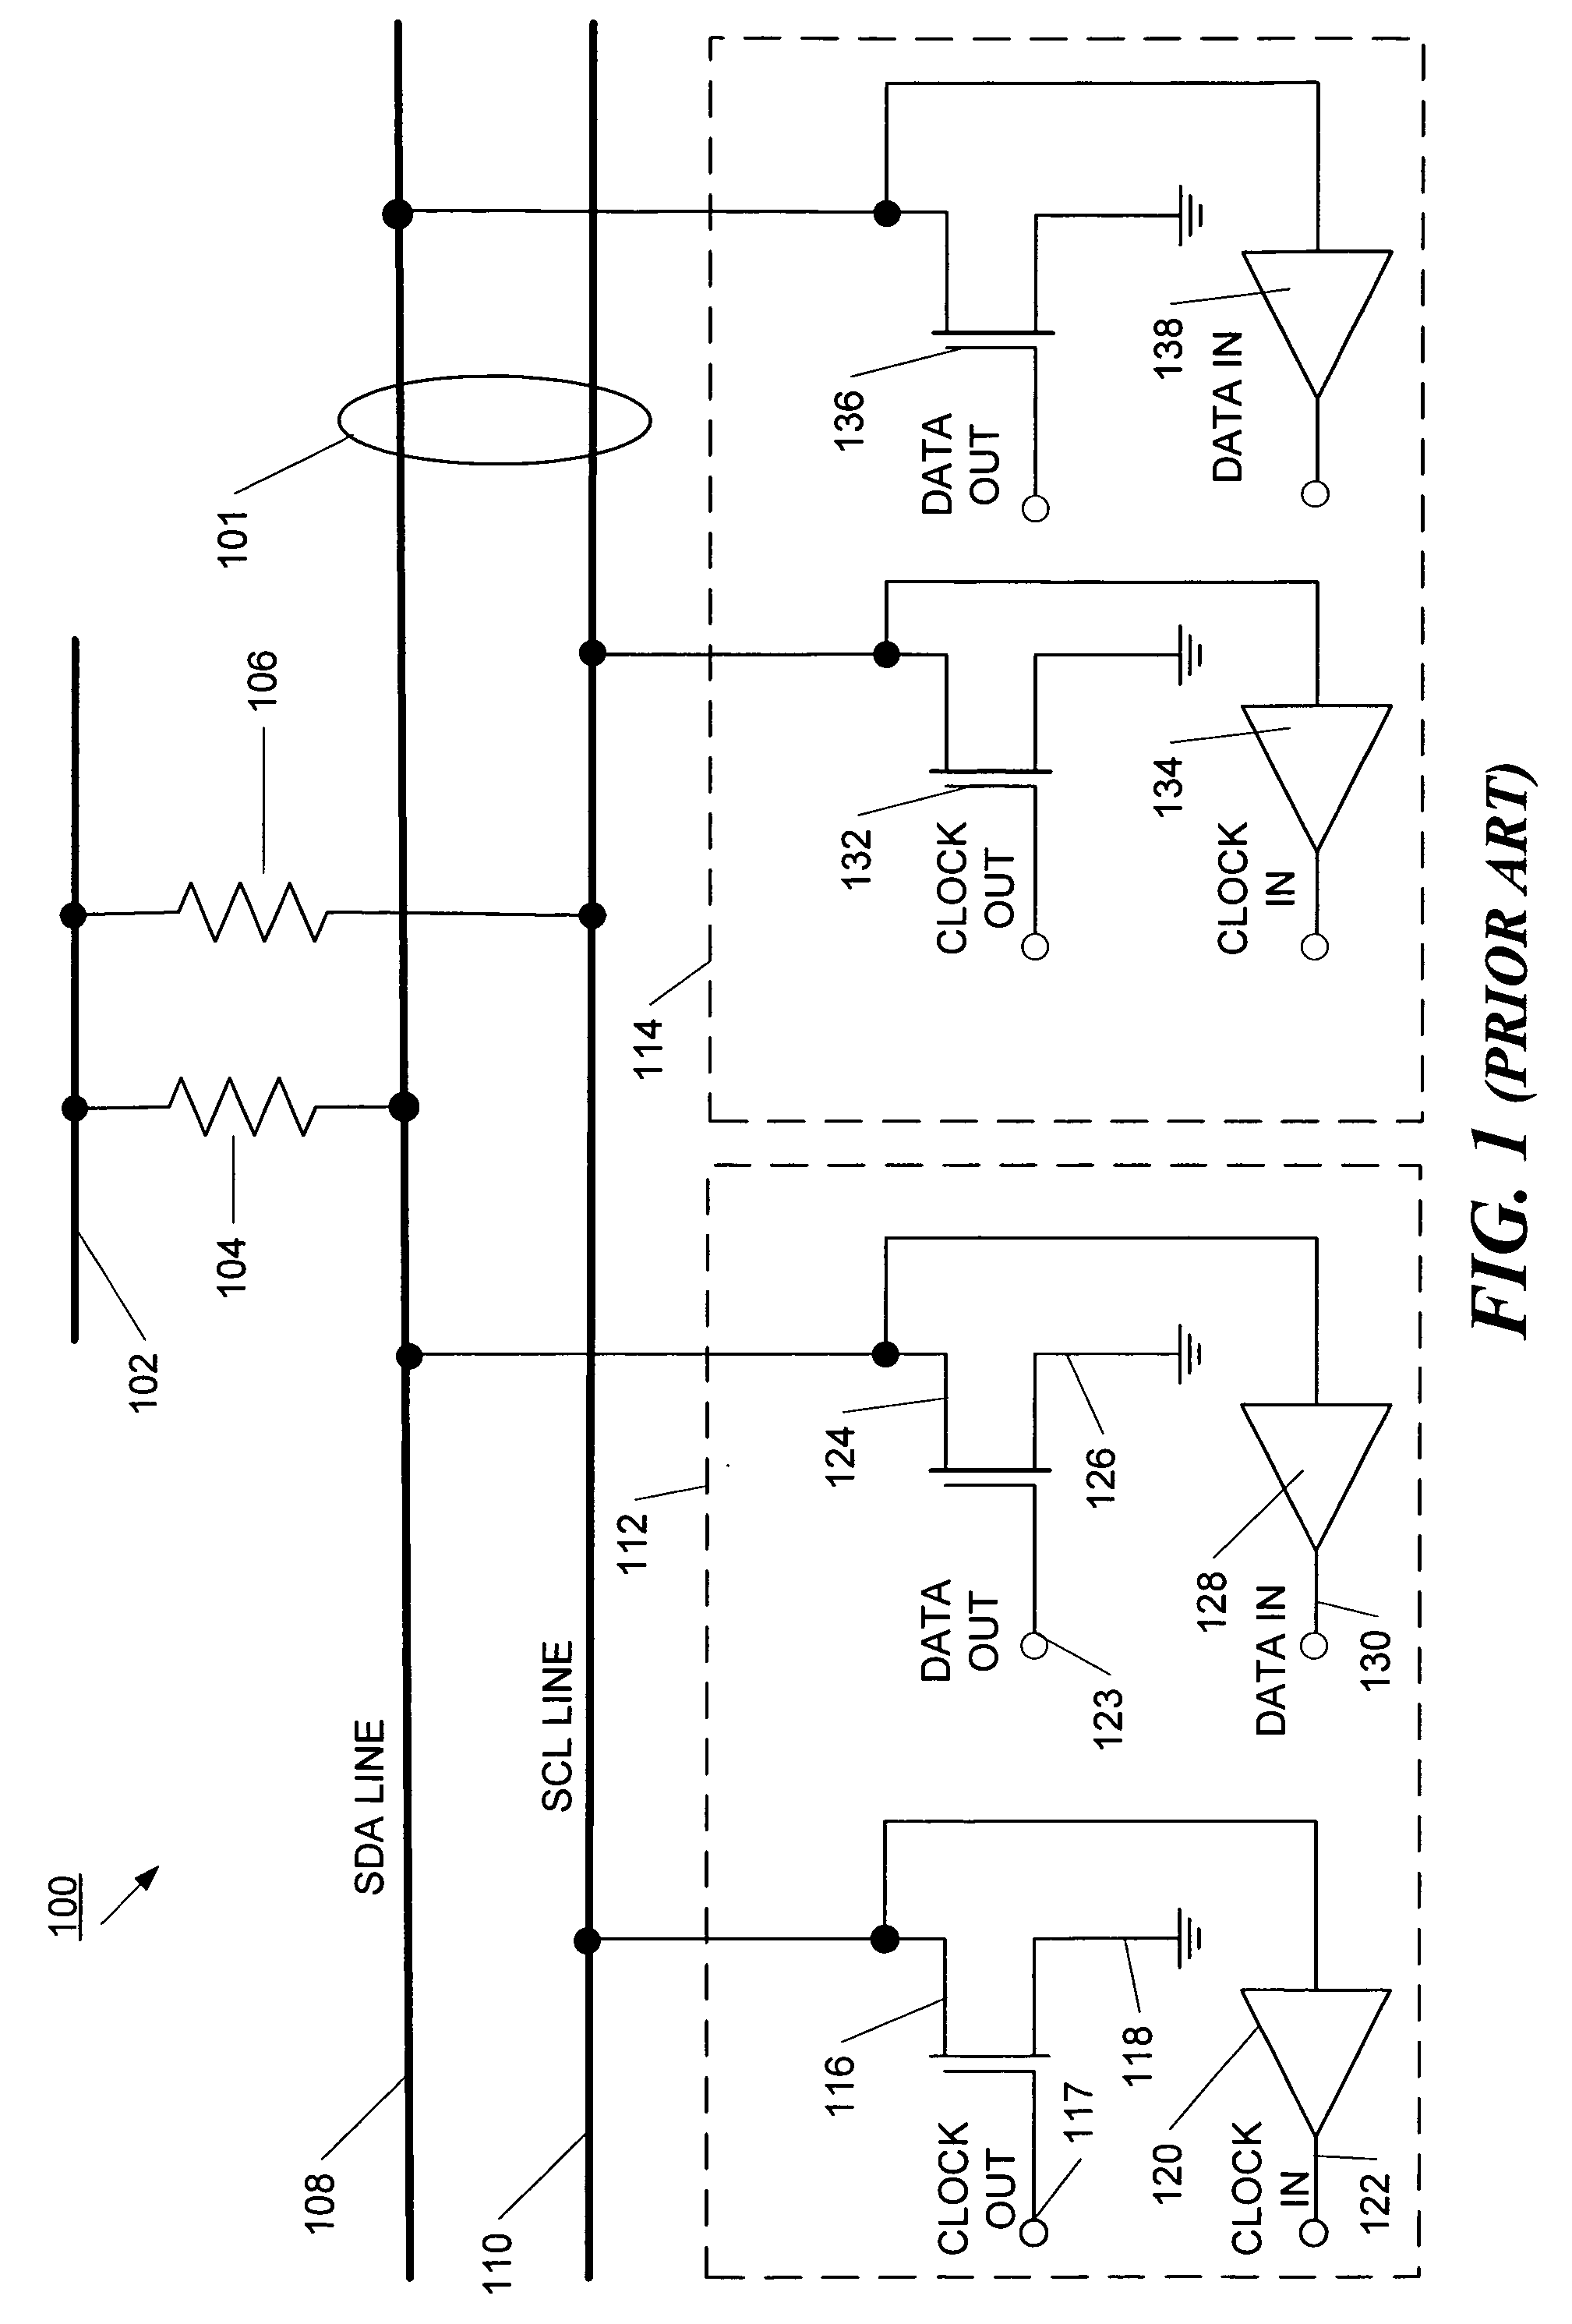 Method and apparatus for constructing wired-and bus systems